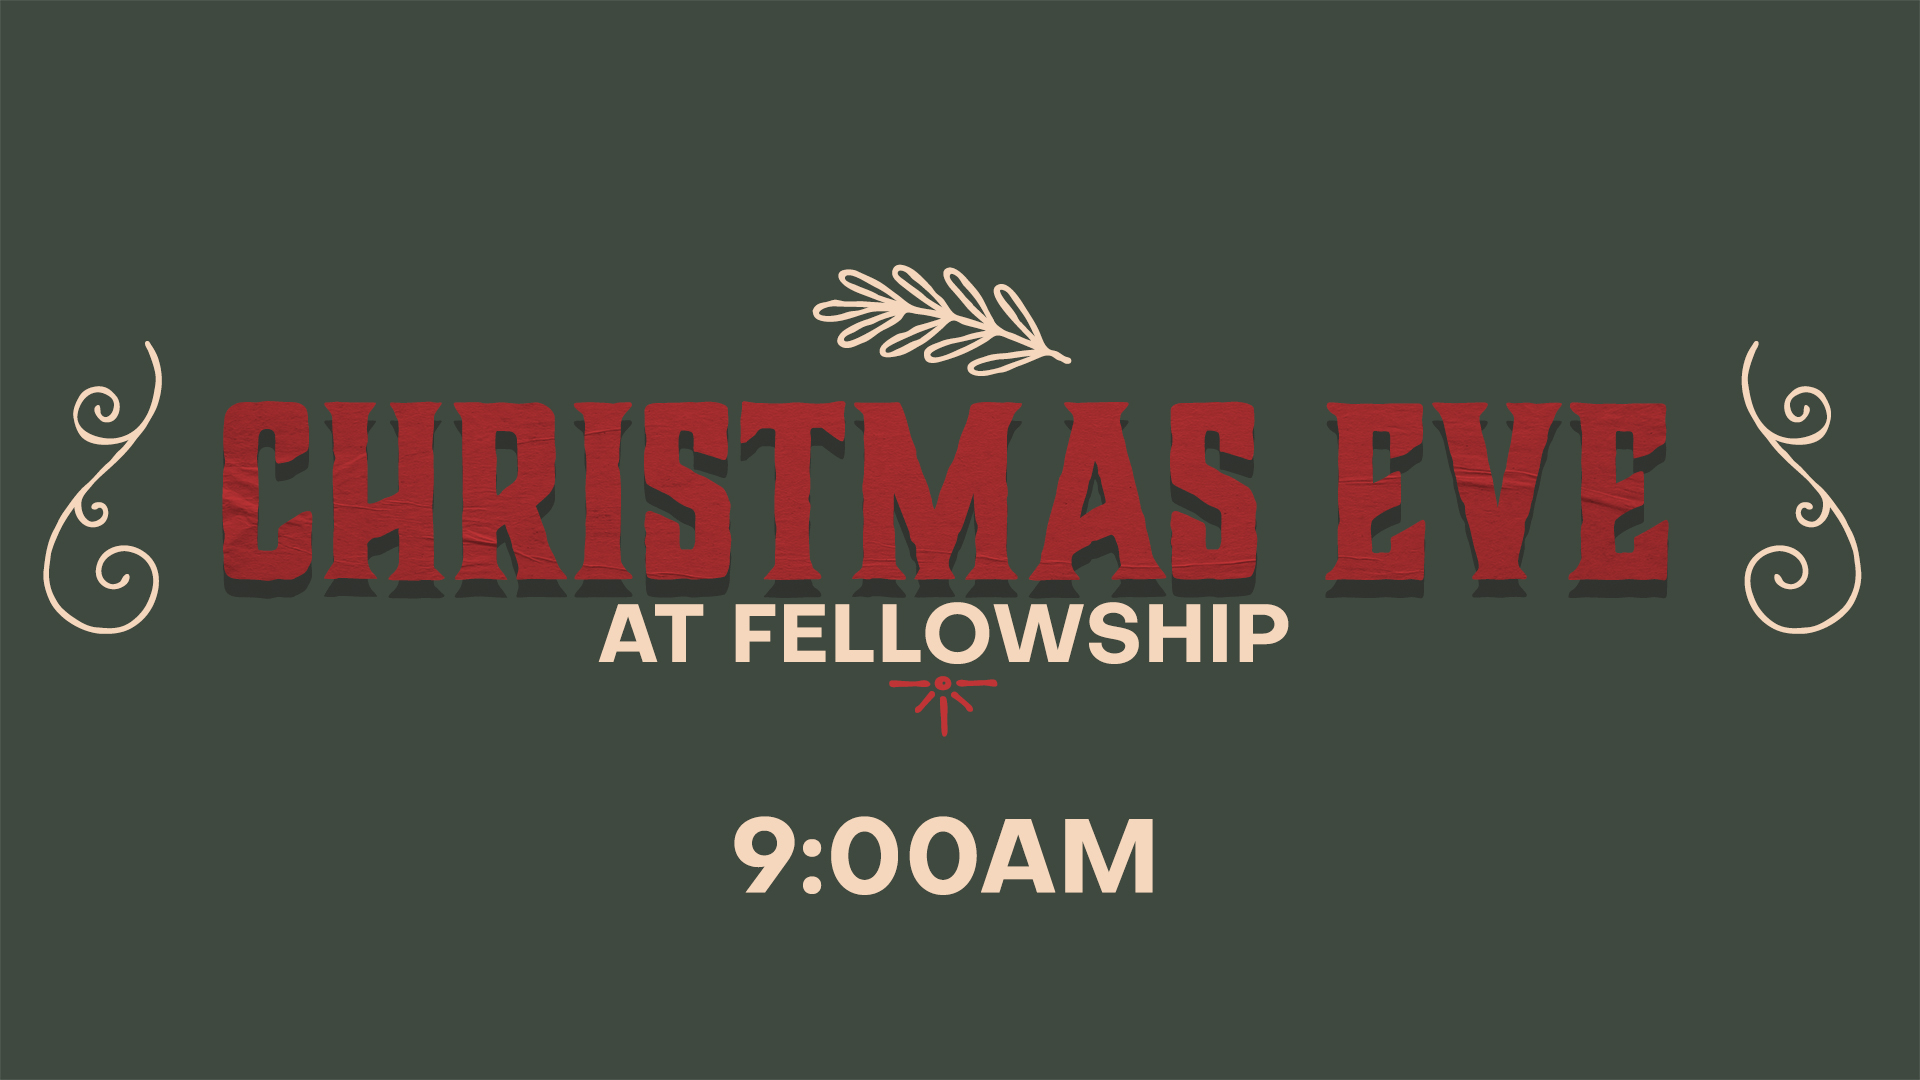 https://www.fellowshipsearcy.org/images/christmas_eve_web.jpg